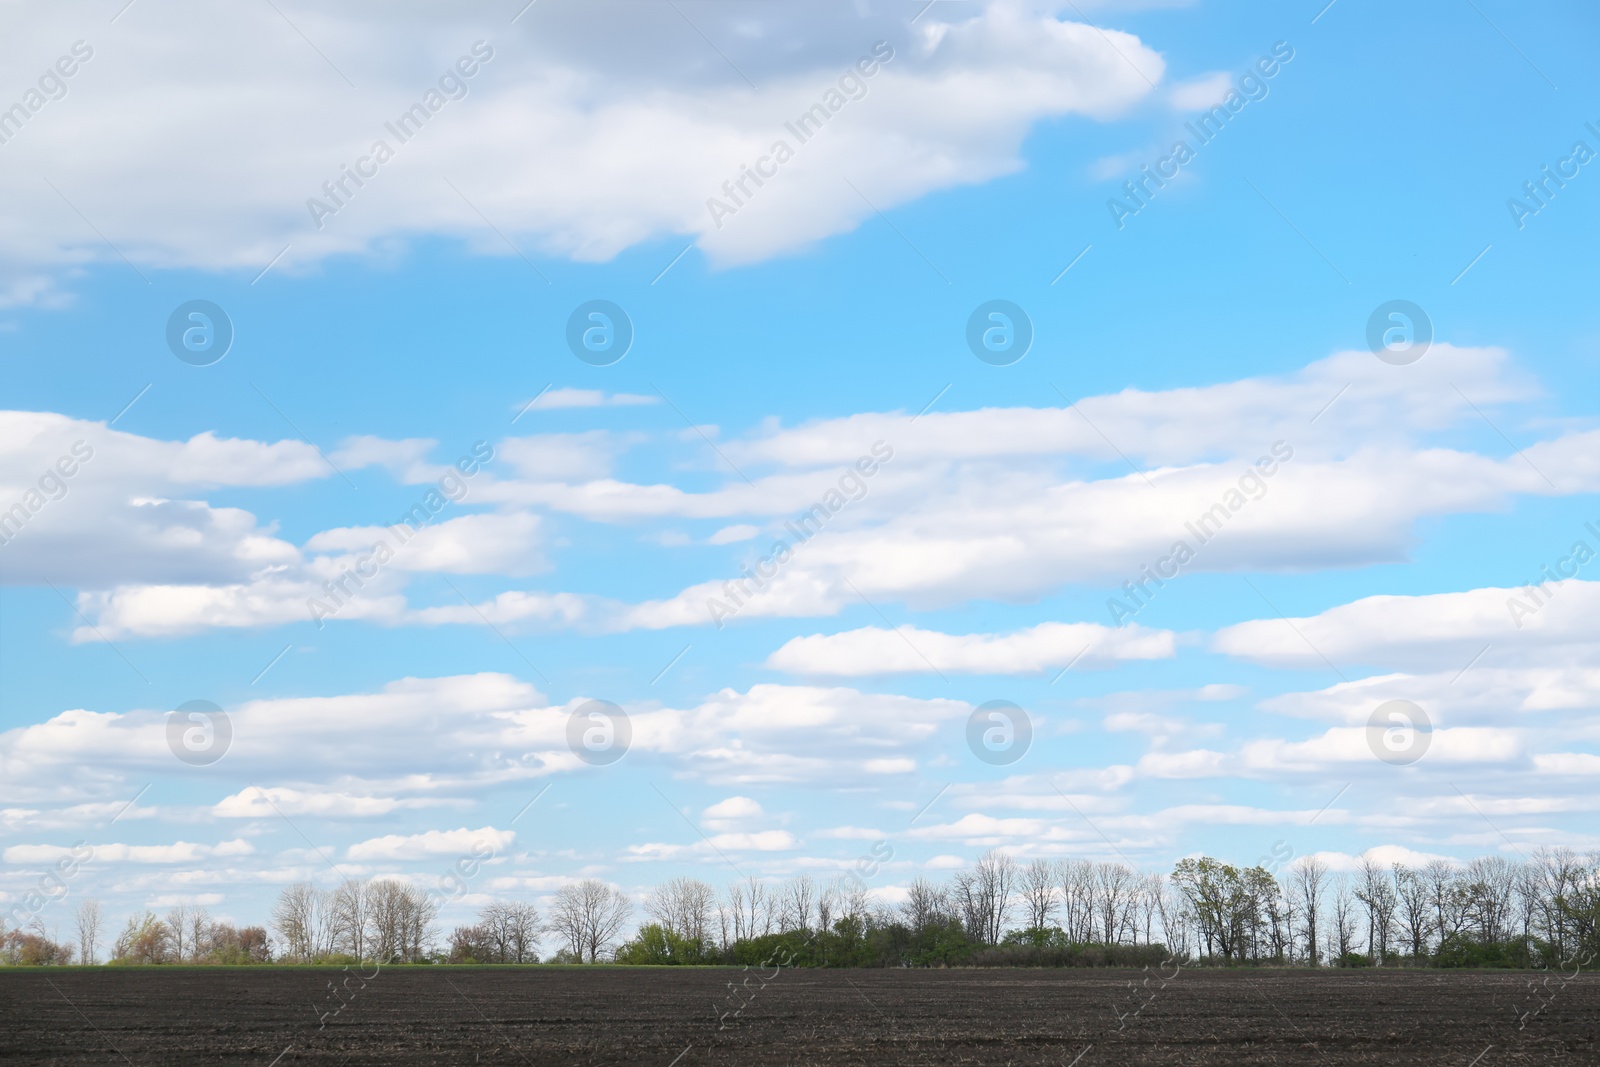 Photo of Picturesque view of agricultural field on cloudy day